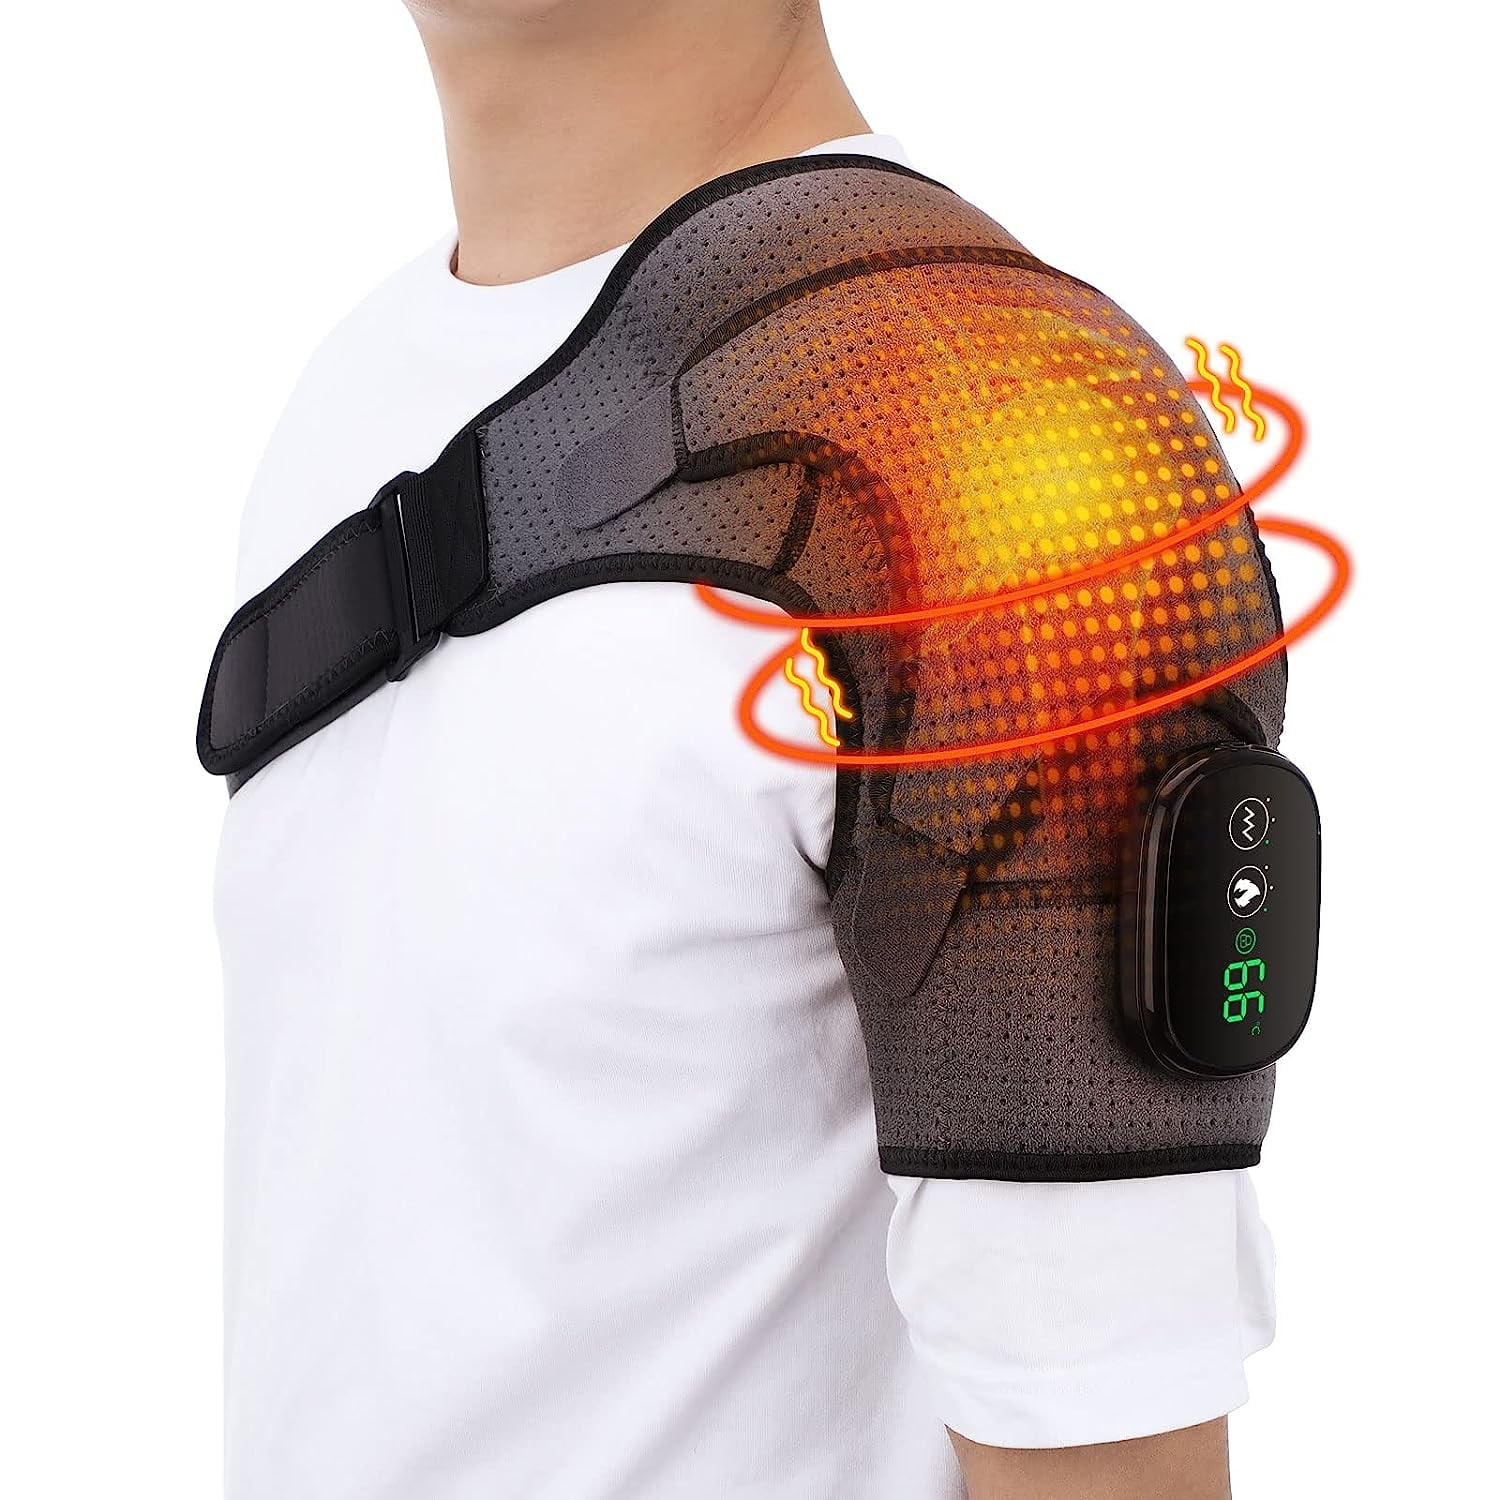 comfheat USB Heated Shoulder Wrap with Vibration Massage for Car Travel  Shoulder Heating Pad Massager for Rotator Cuff Pain Upper Arm Muscle Relief